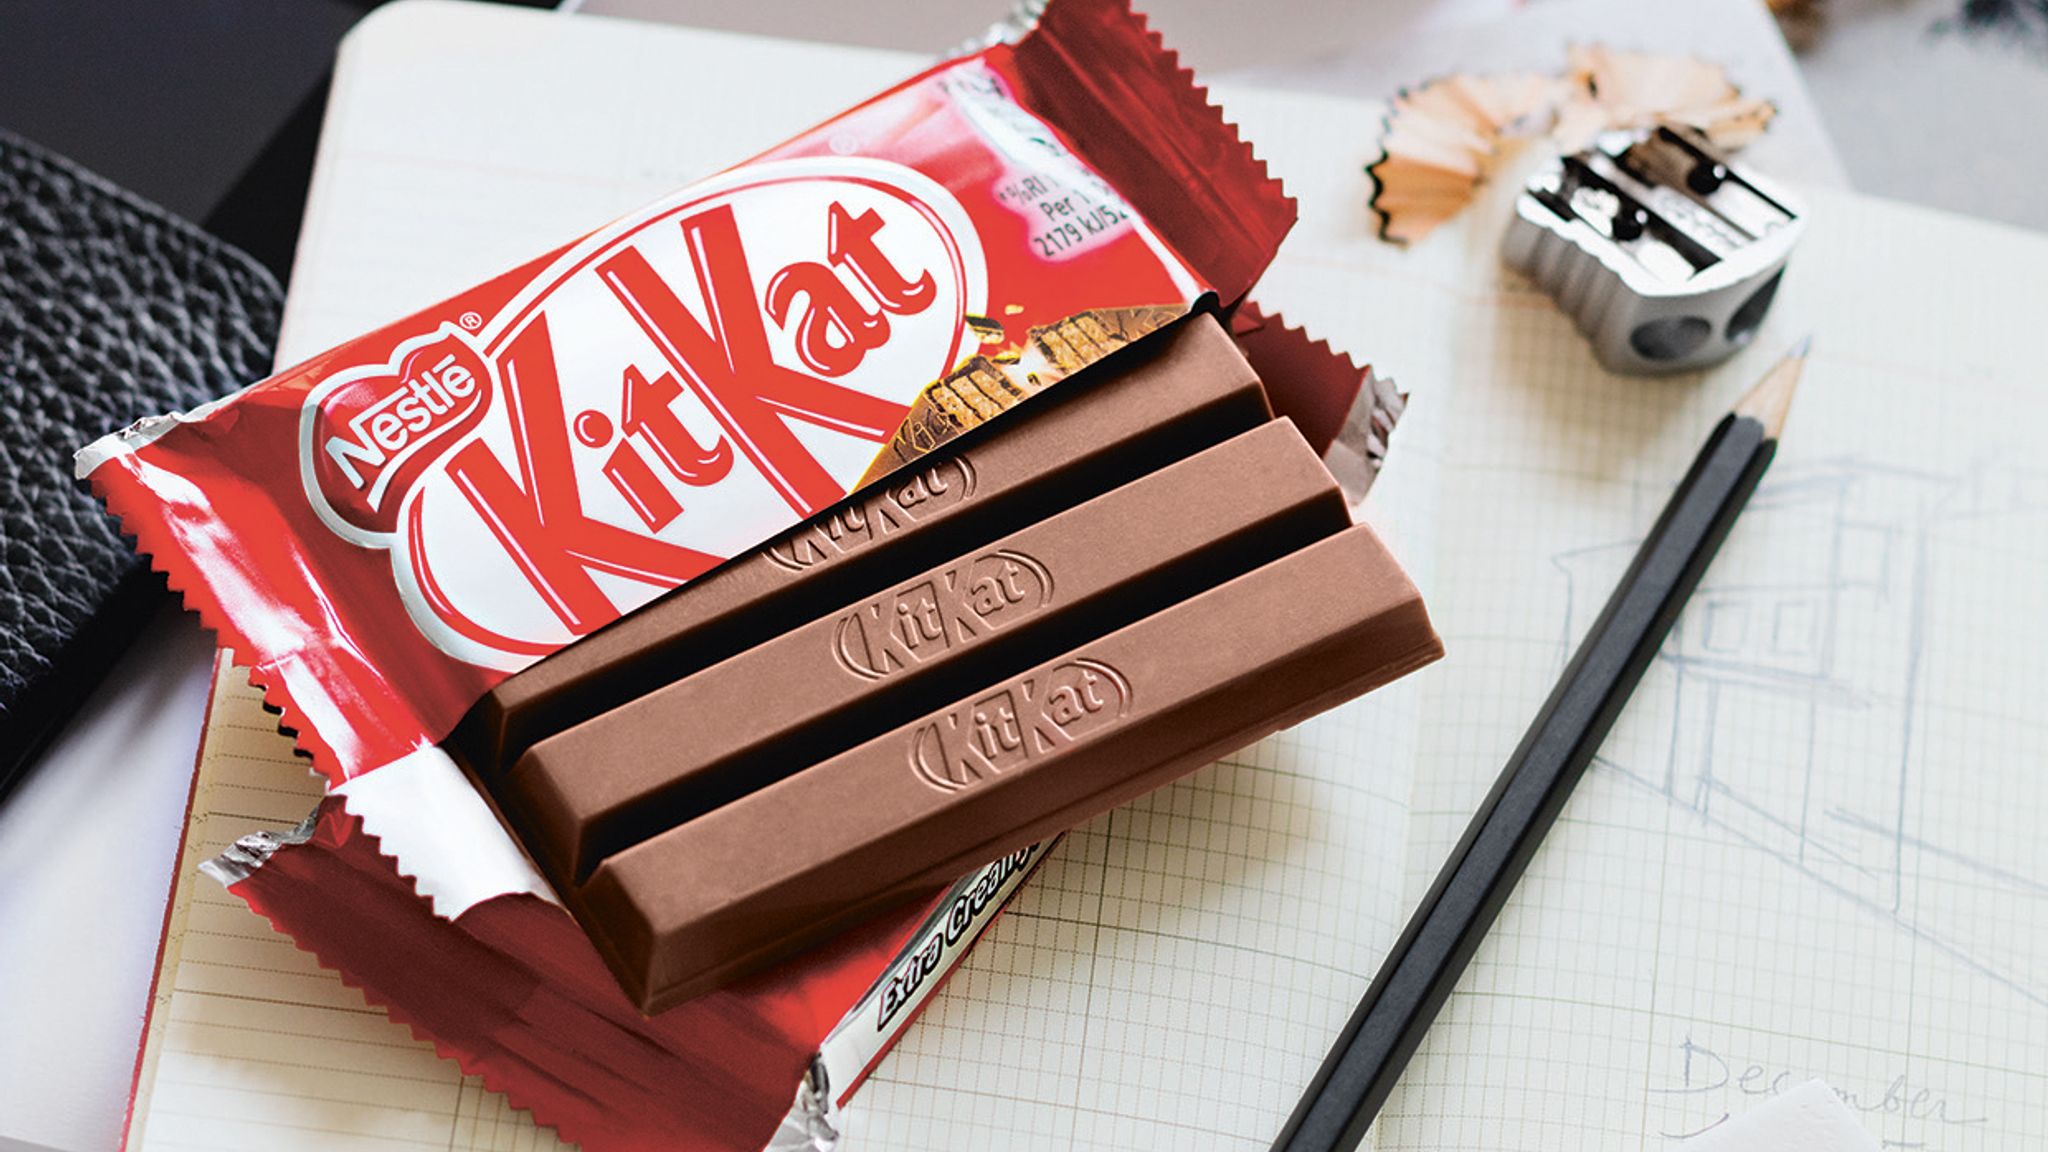 Cost of living: KitKat-maker Nestle warns of further price hikes ahead to  protect margins from rising costs | Business News | Sky News